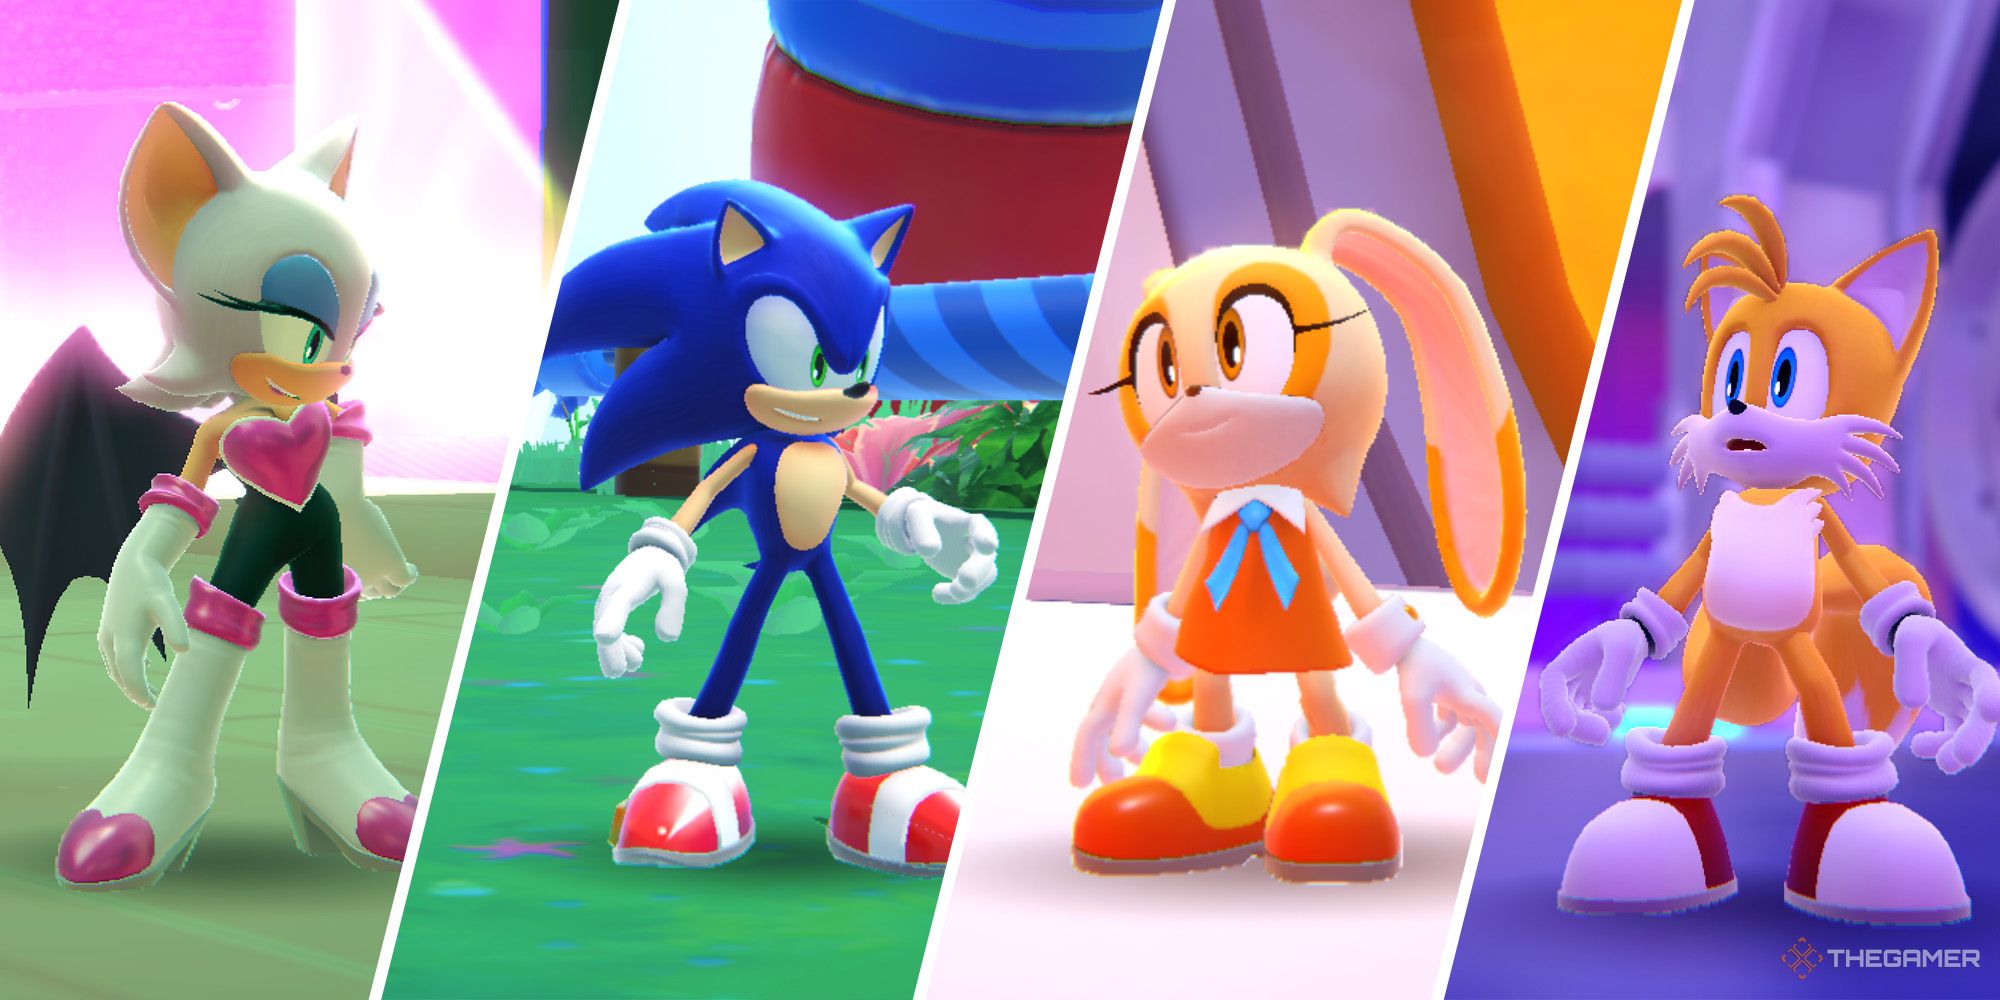 Sonic Dream Team: Split image of Sonic, Rouge, Cream, and Tails